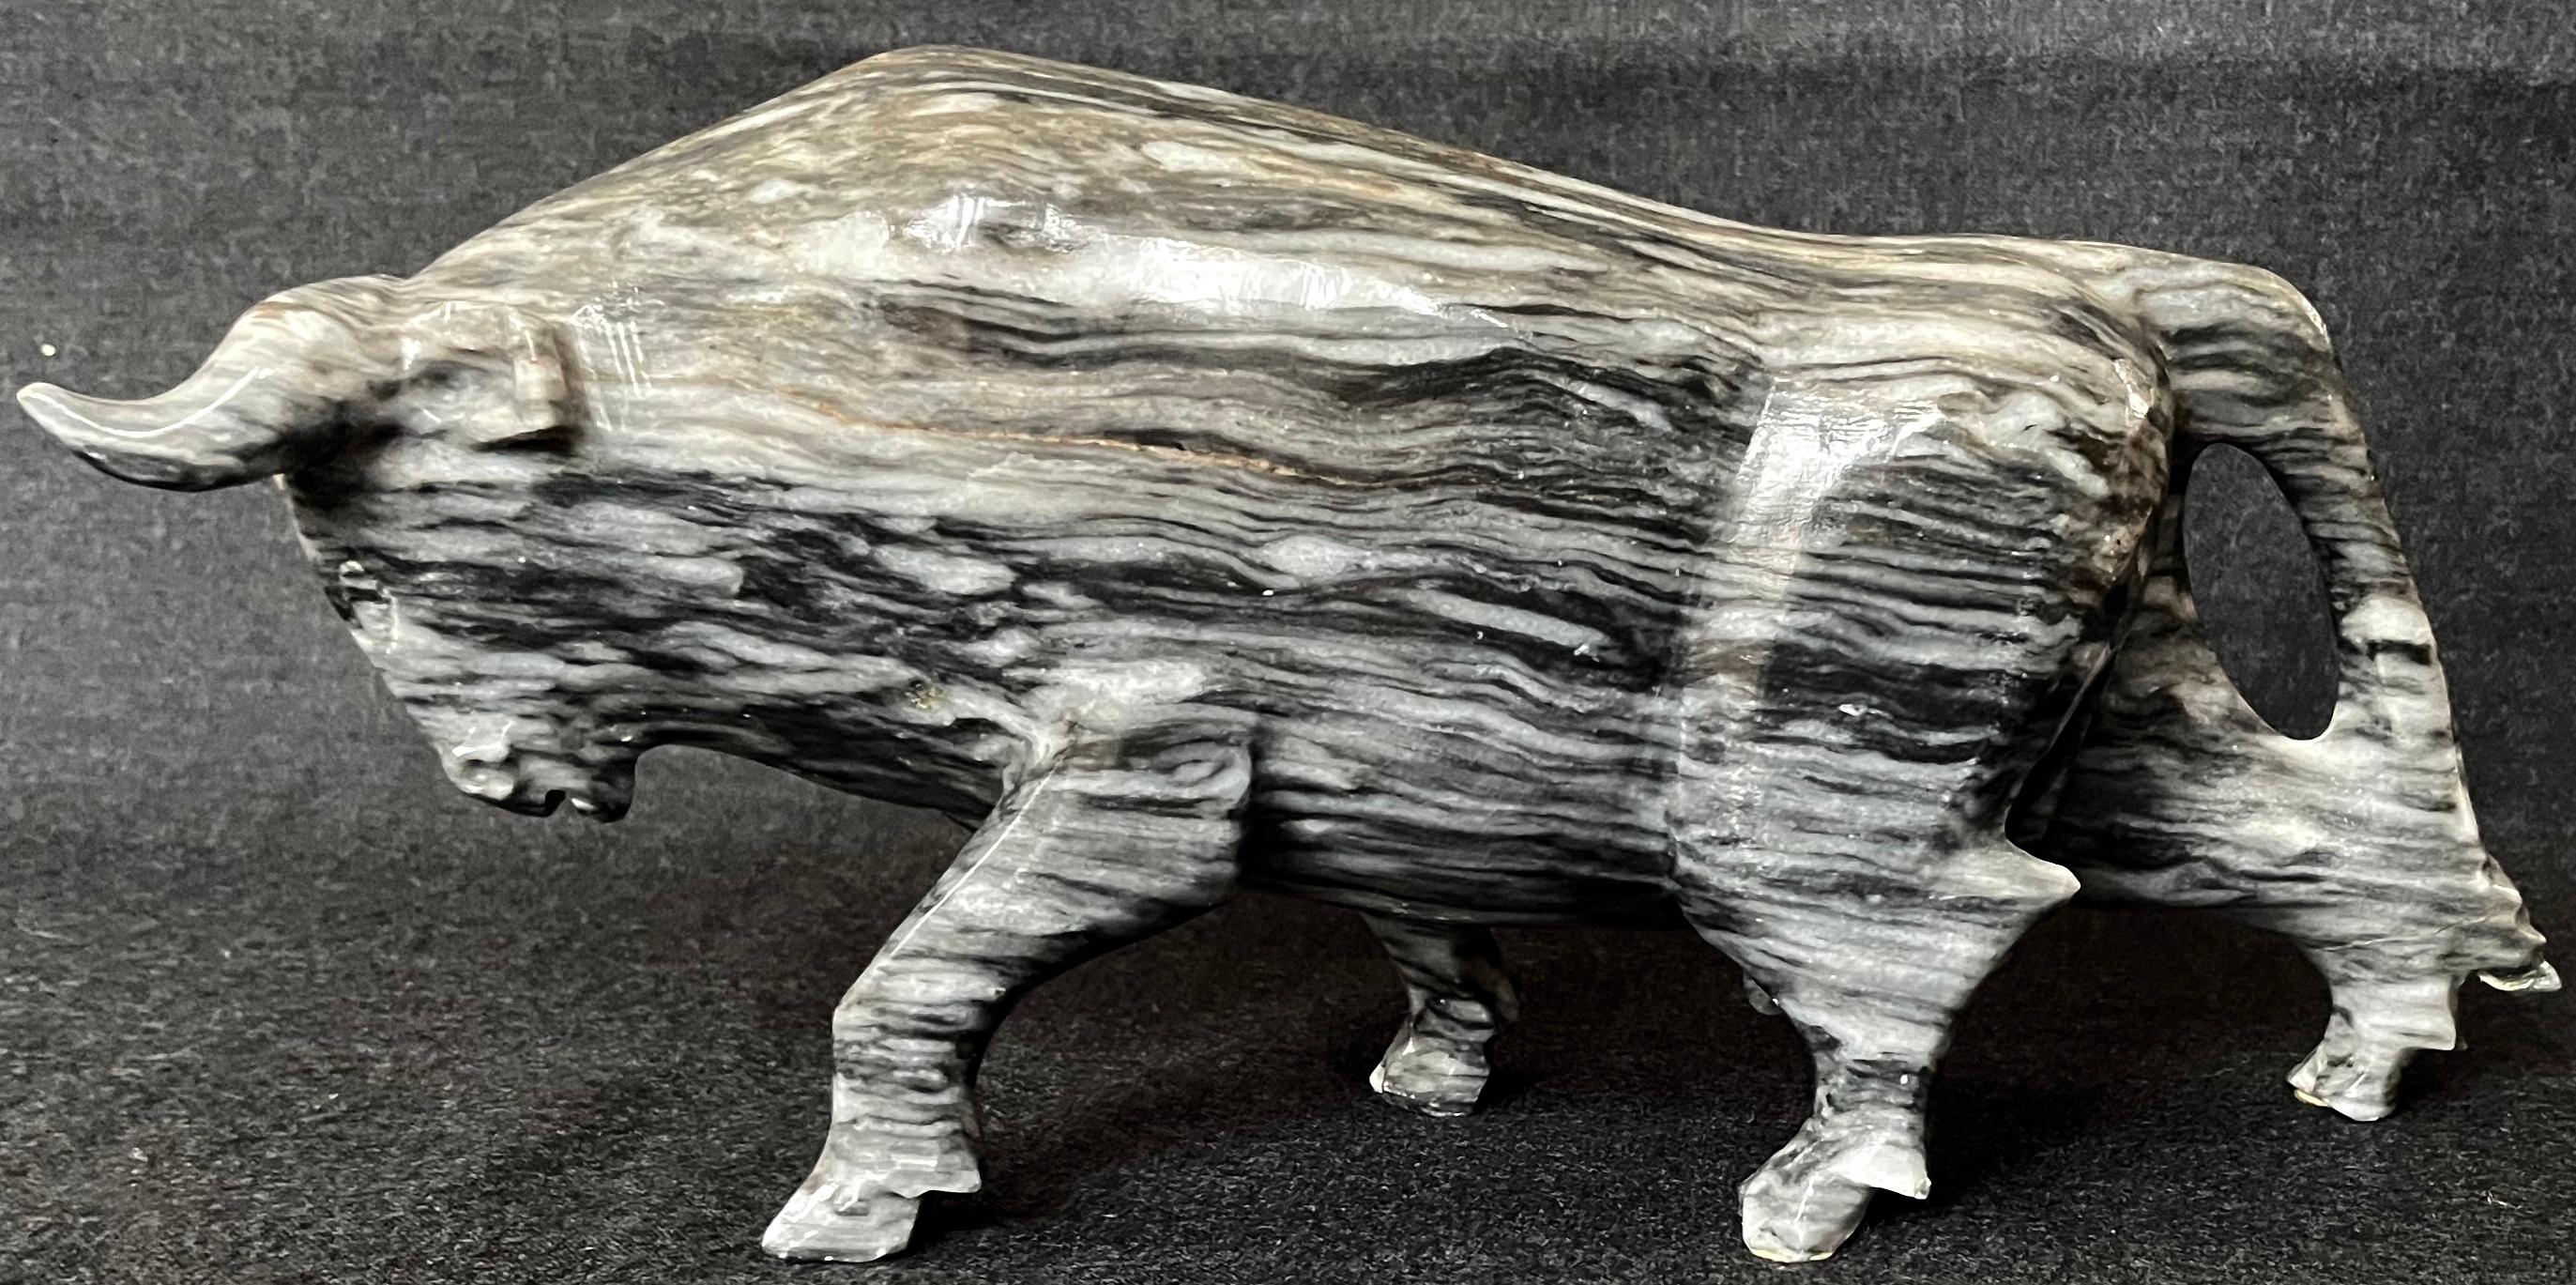 Mid-20th Century Wall Street Bull Sculpture For Sale